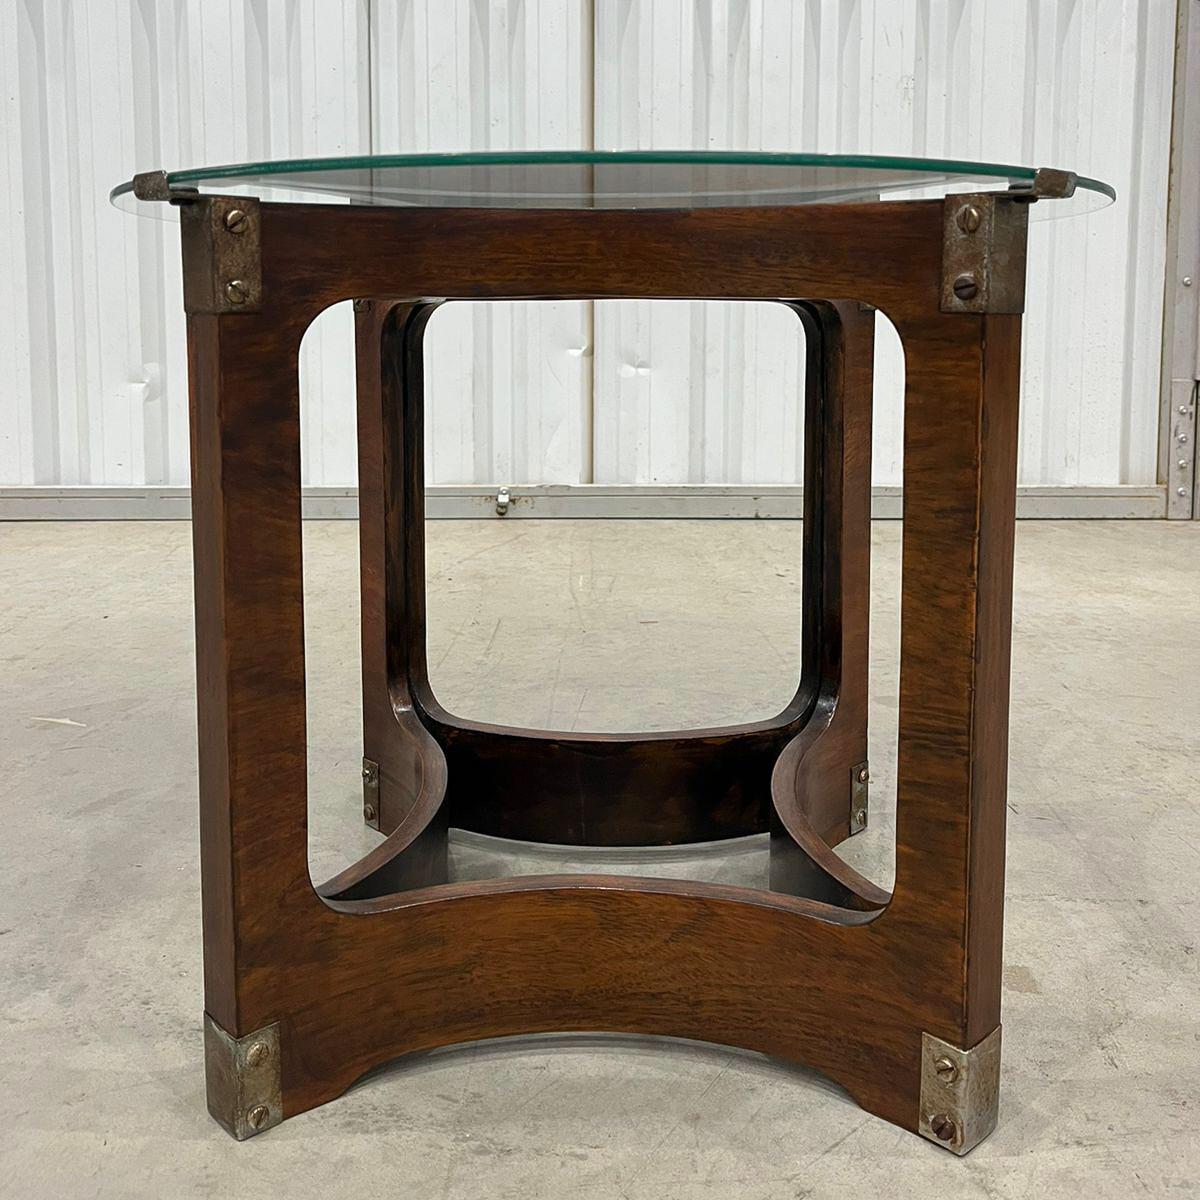 Mid-Century Modern Side Table in Bentwood & Glass by Novo Rumo, 1960s, Brazil For Sale 5